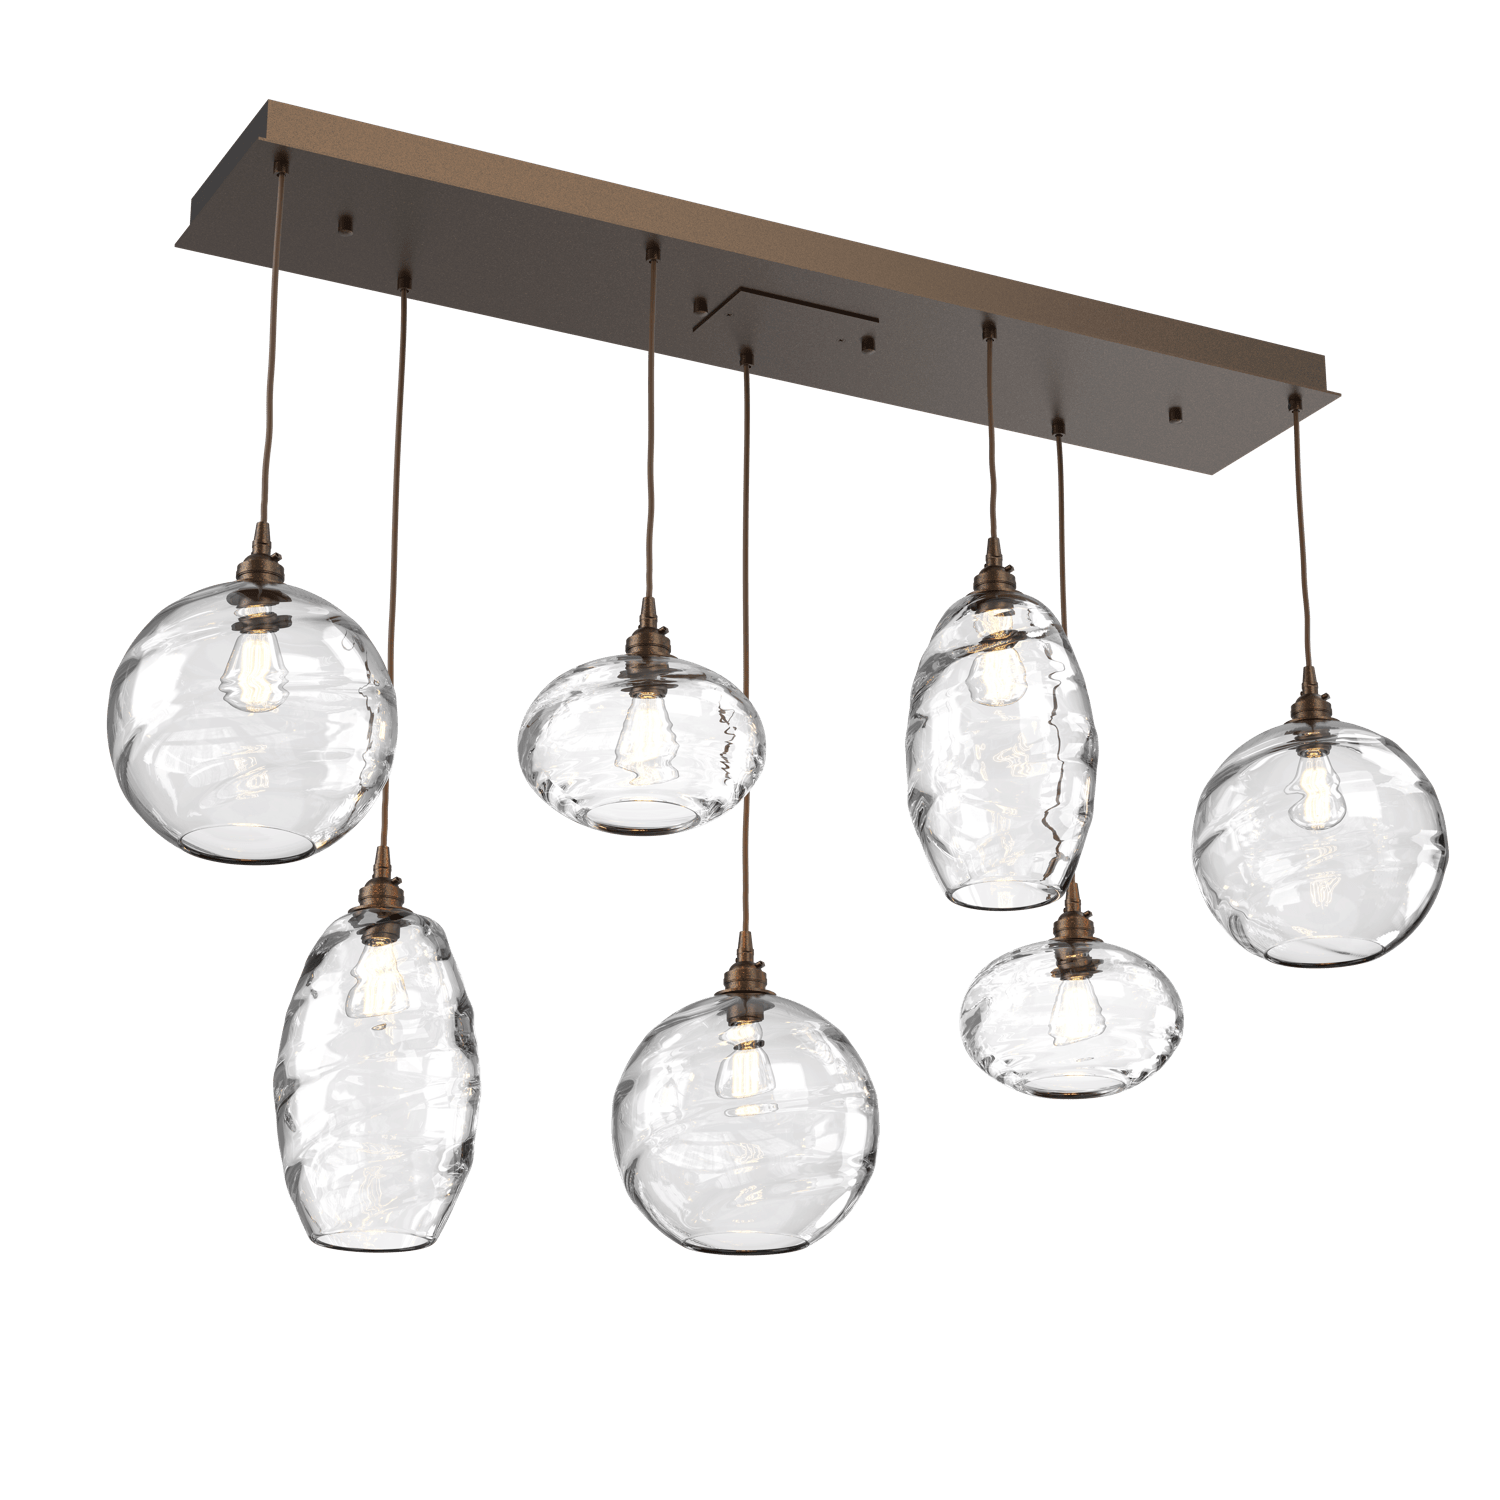 PLB0048-07-FB-OC-Hammerton-Studio-Optic-Blown-Glass-Misto-7-light-linear-pendant-chandelier-with-flat-bronze-finish-and-optic-clear-blown-glass-shades-and-incandescent-lamping